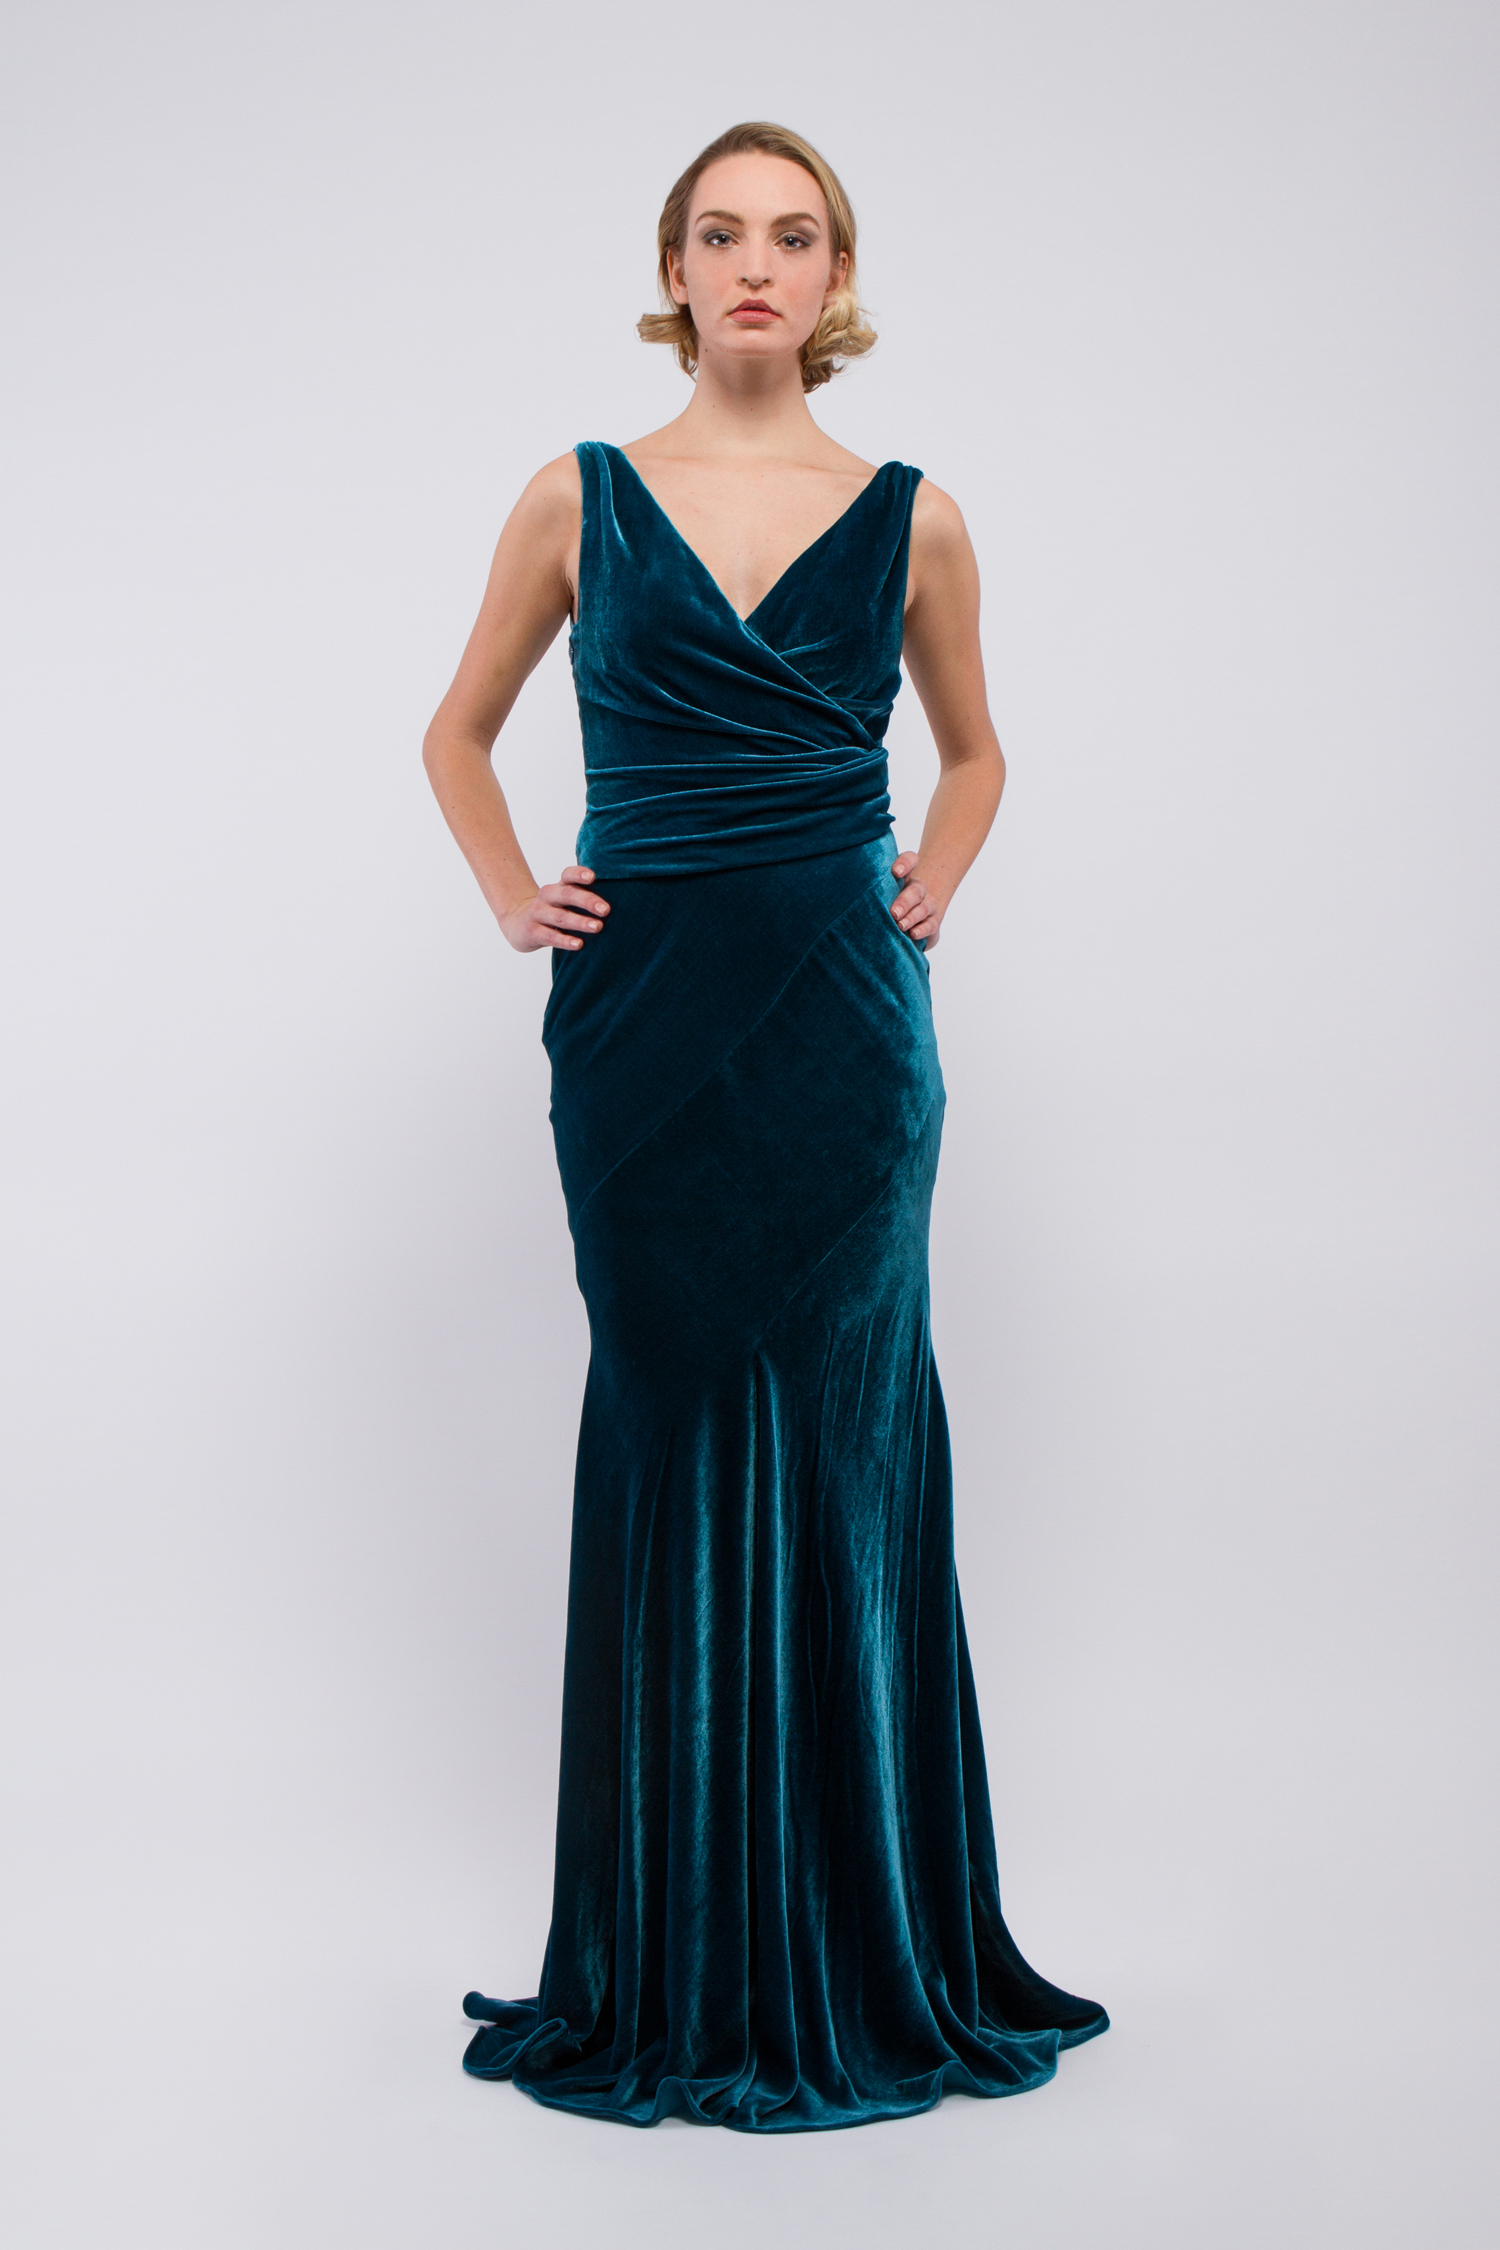 Silk velvet gown with bias seam detailing - Look 2 - The Dream